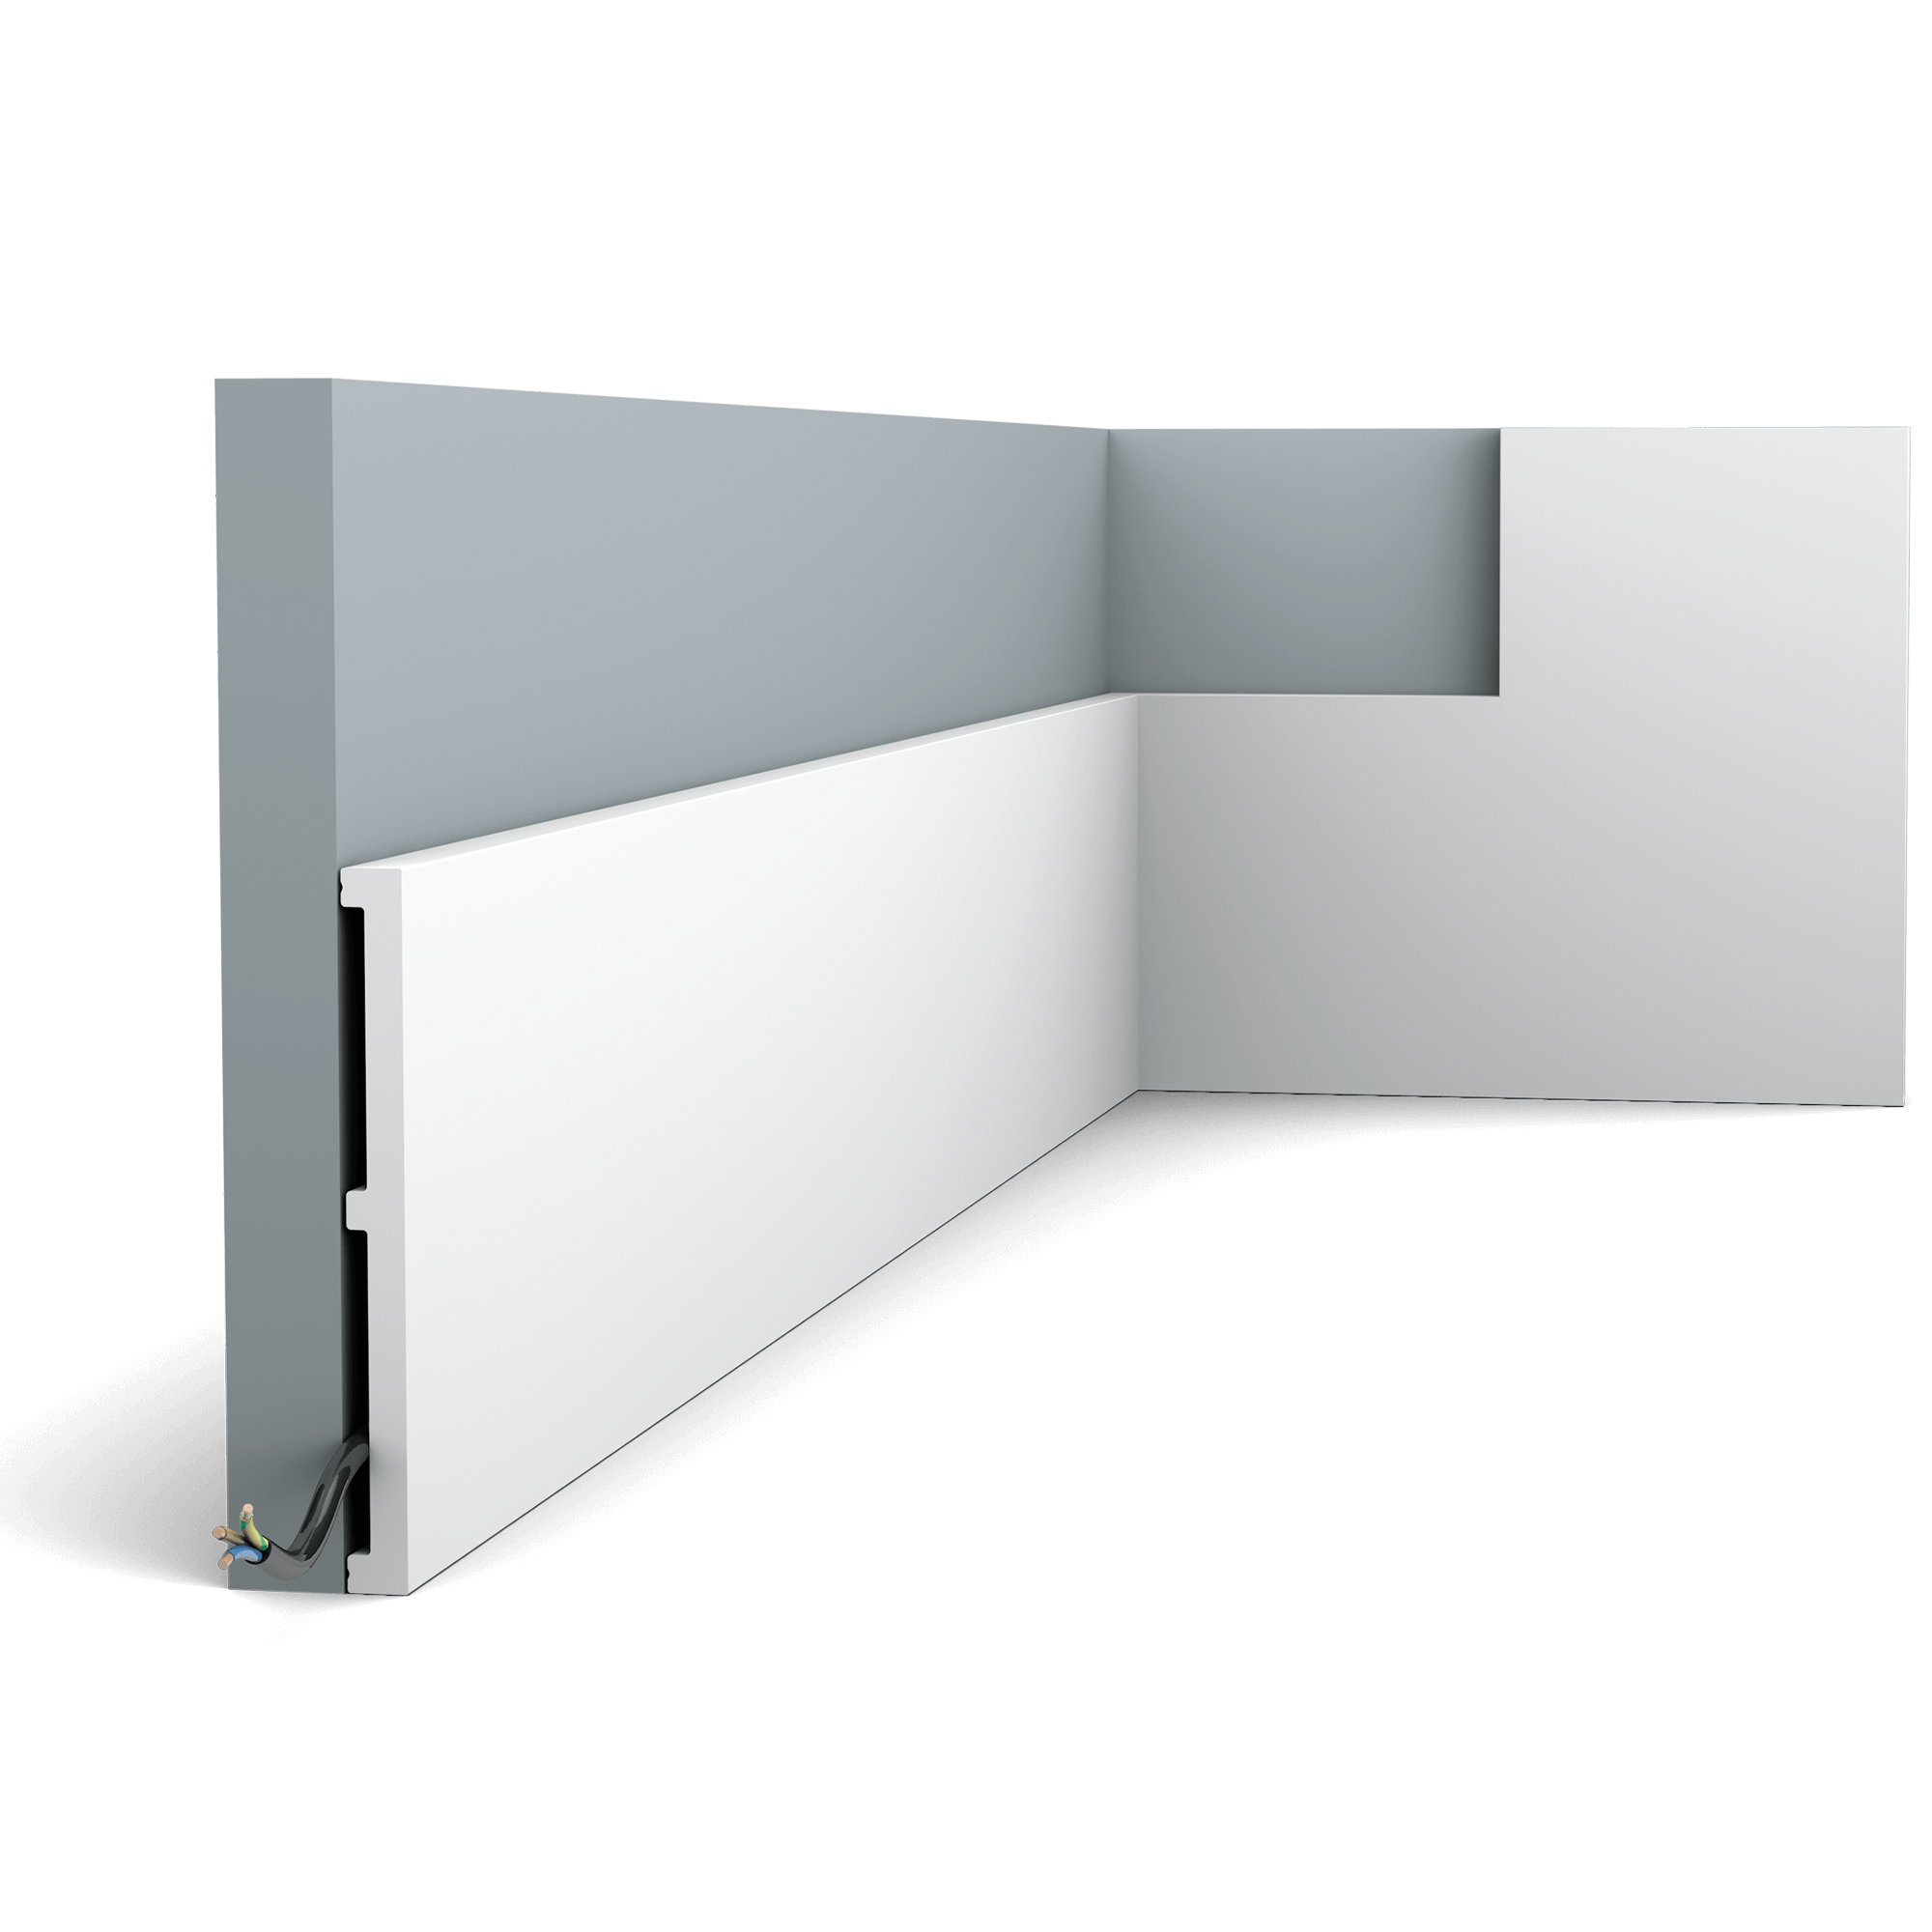 This simple skirting board is the largest in the SQUARE family. Use this multifunctional profile to fit your entire home with the same skirting board. All you need to do is select the correct size to fit your space.